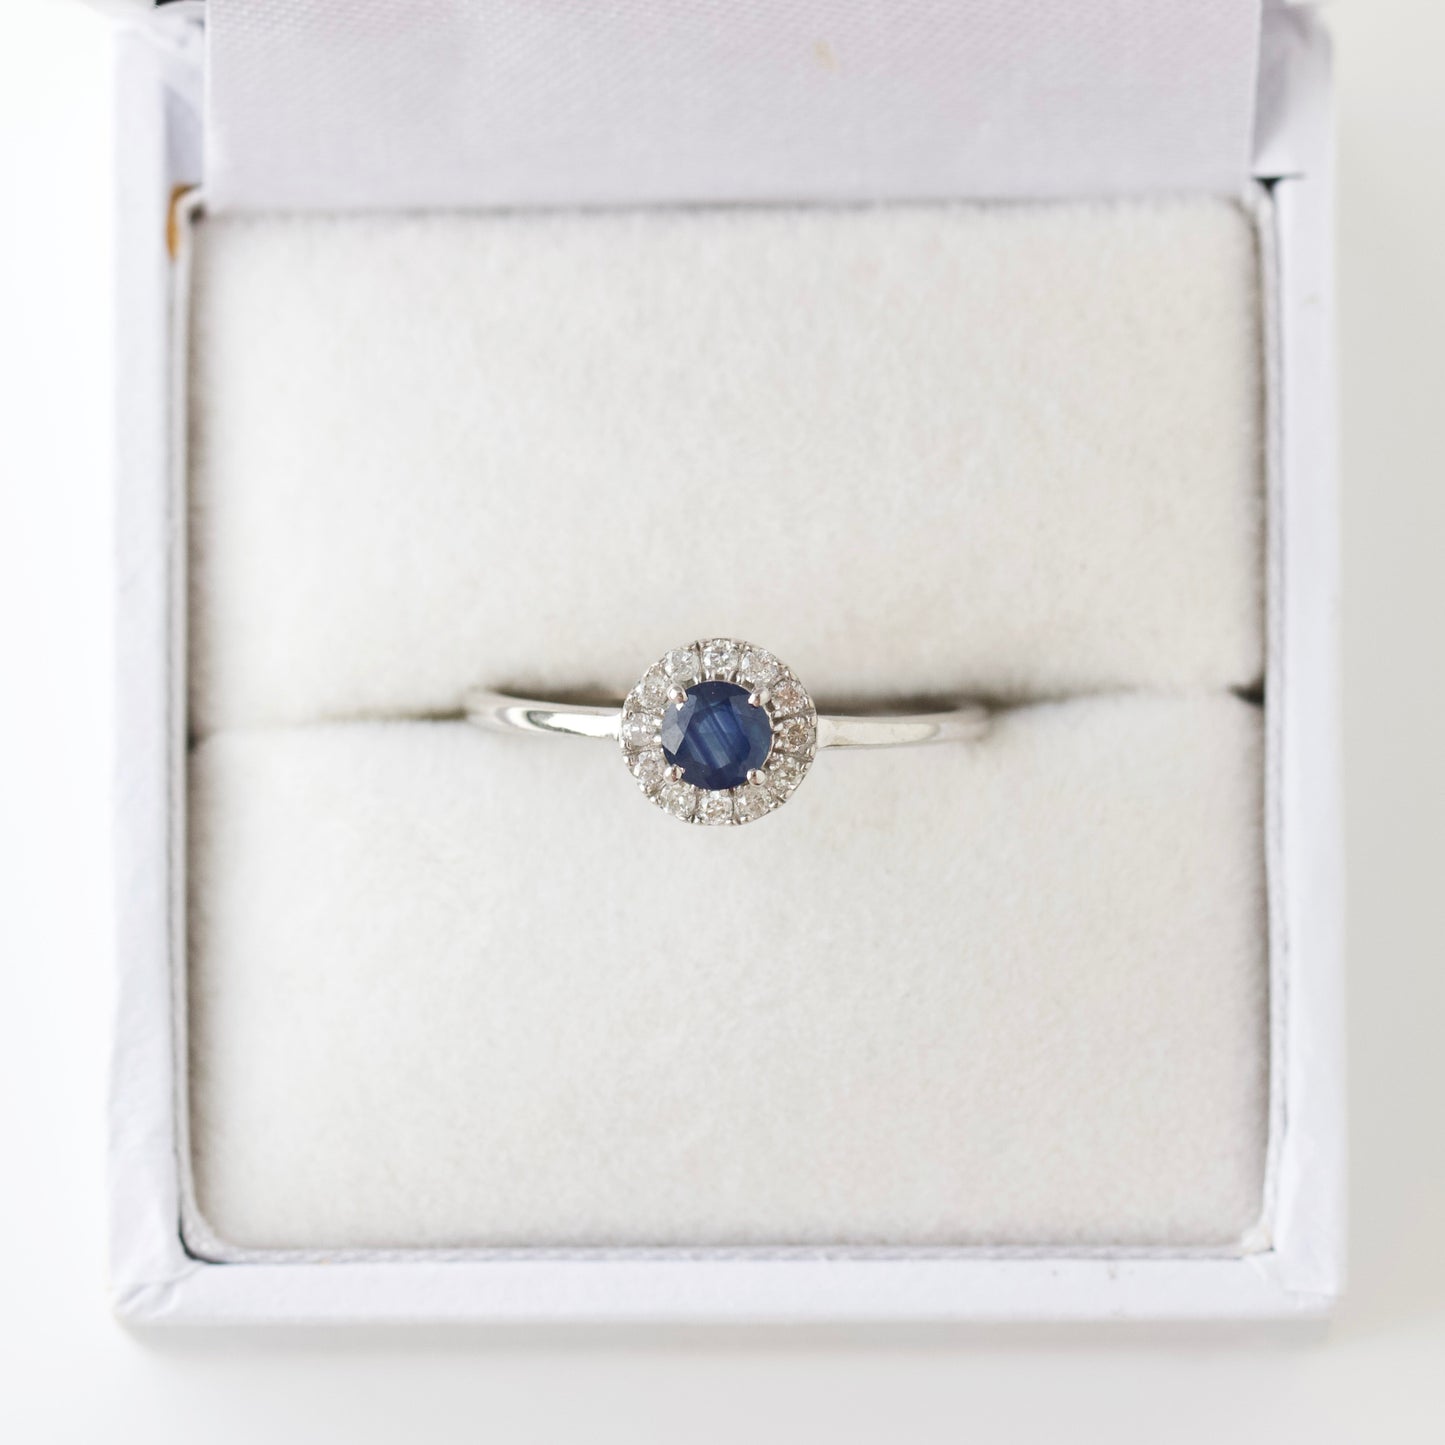 SAMPLE SALE- Blue Sapphire and Diamond Ring in 9k Solid White Gold- Size UK O